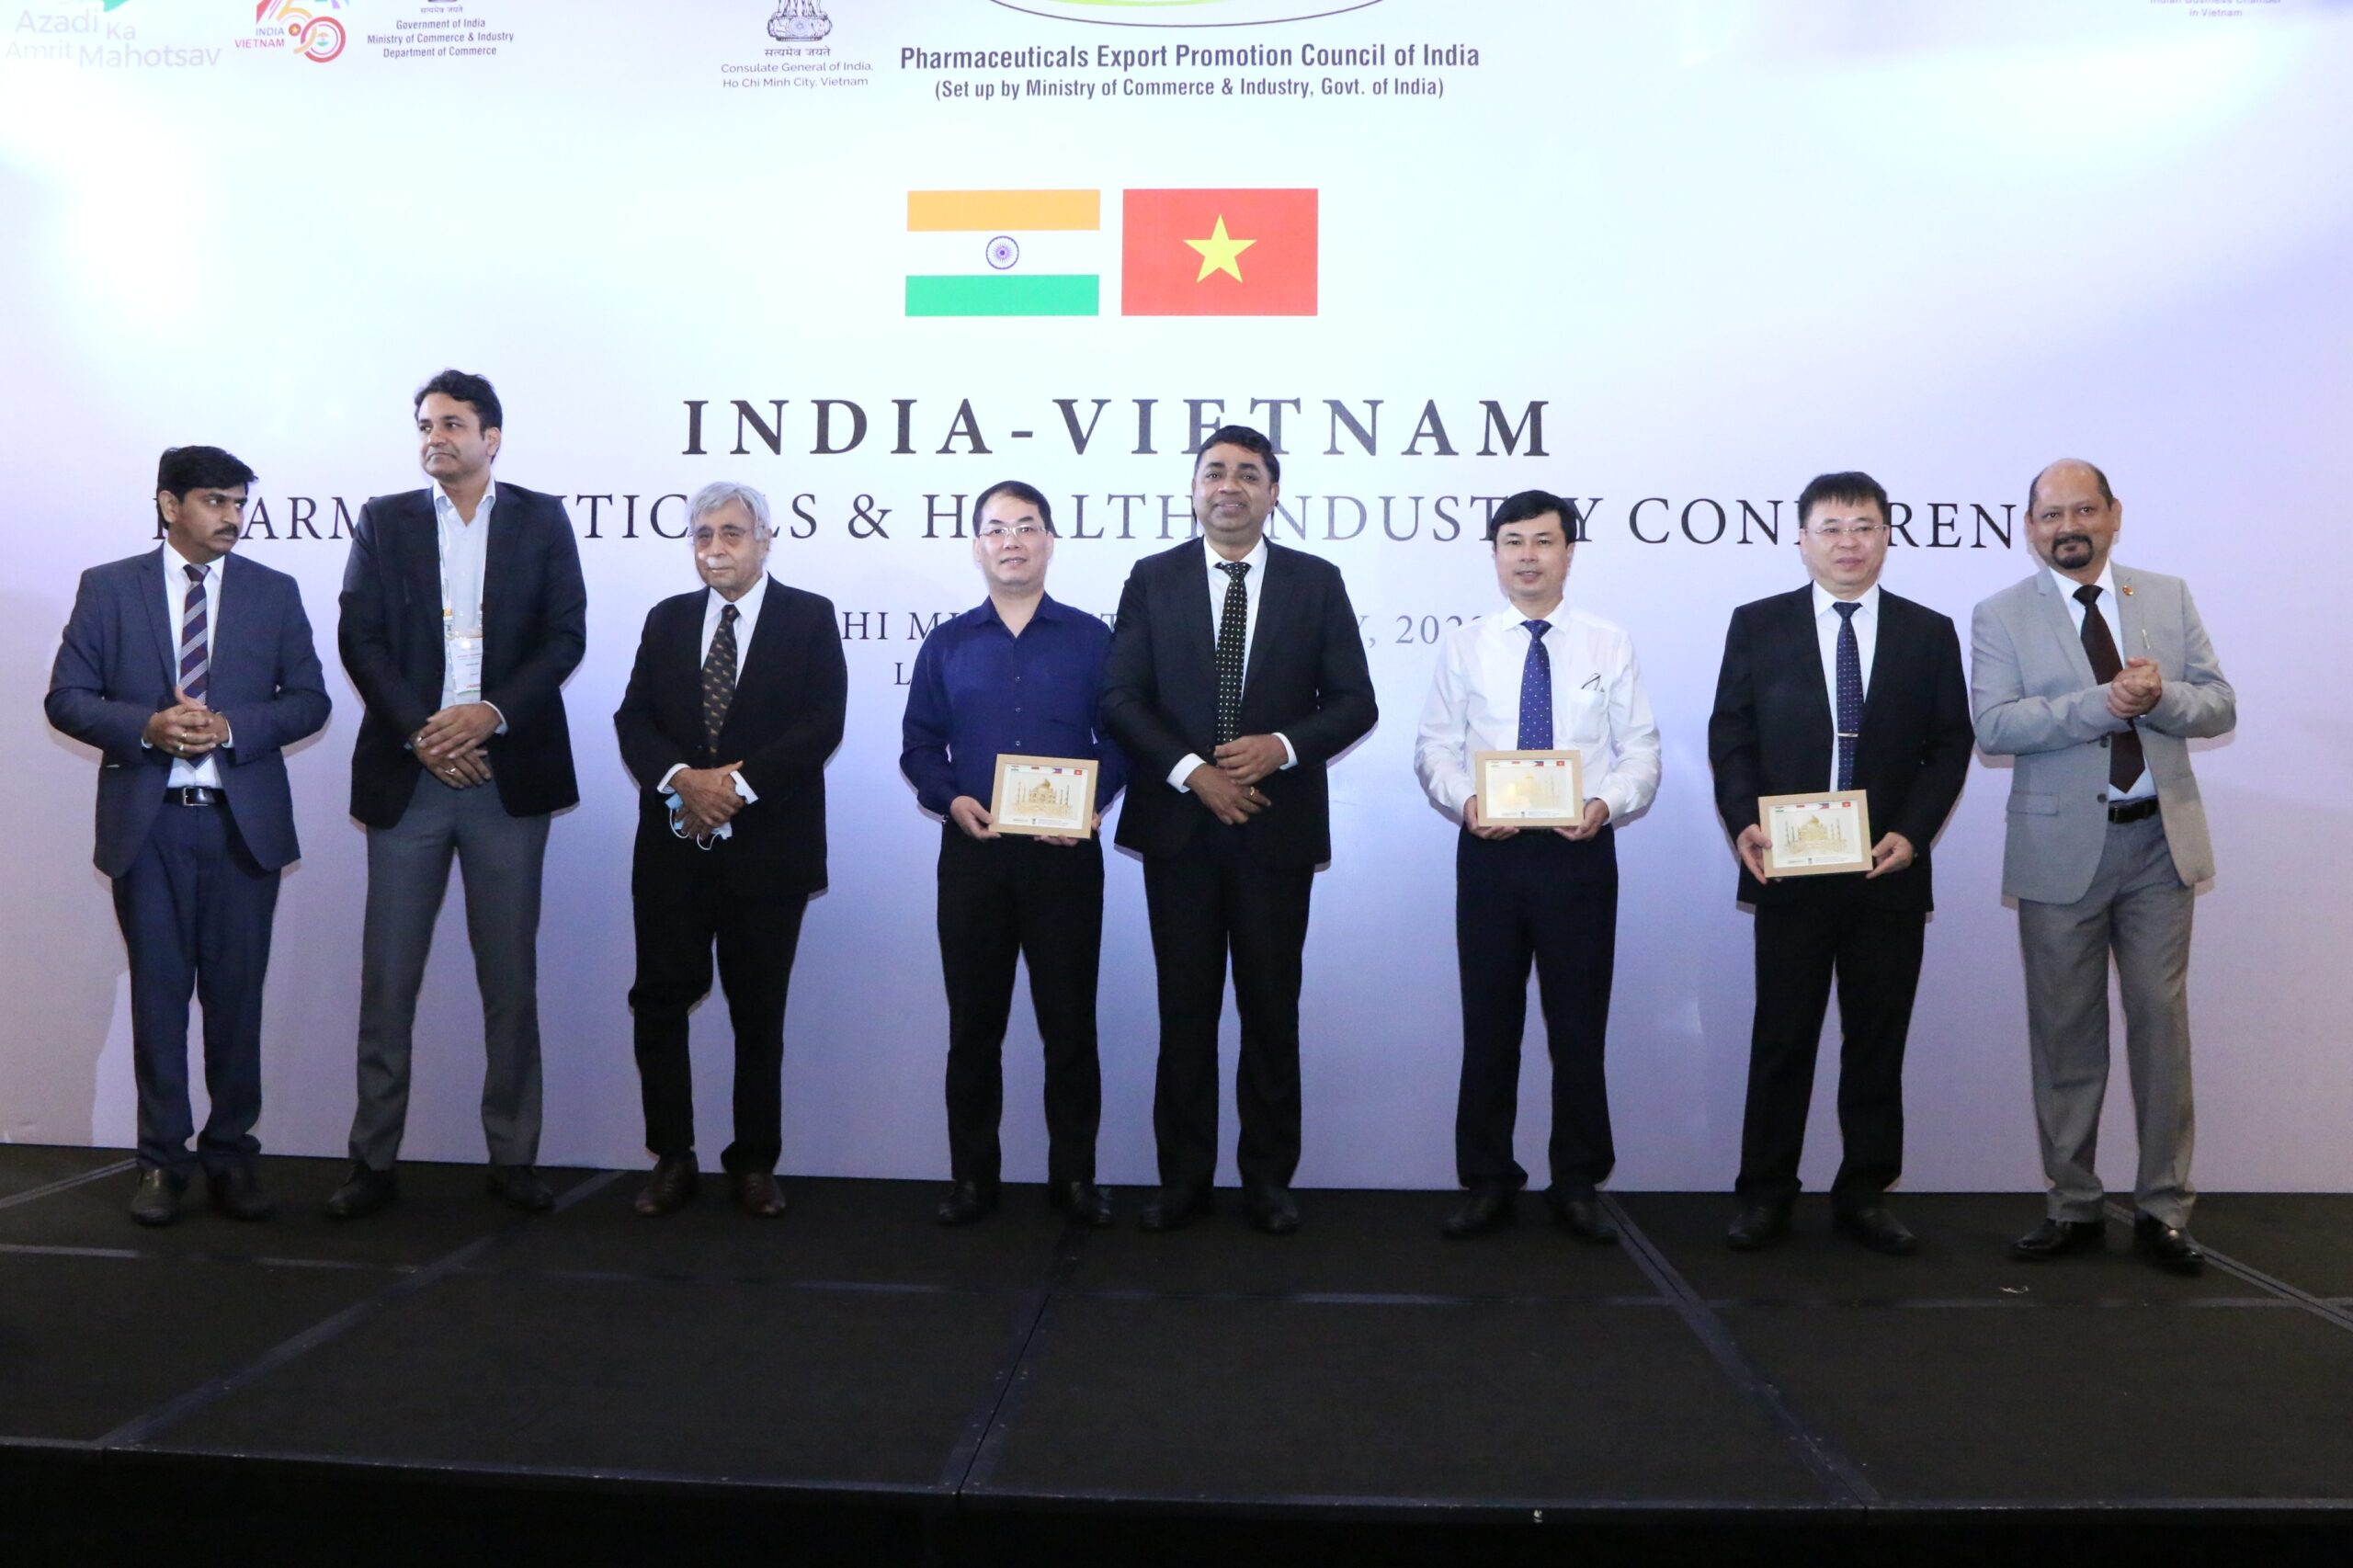 India – Vietnam Pharmaceuticals & Health Industry Conference 